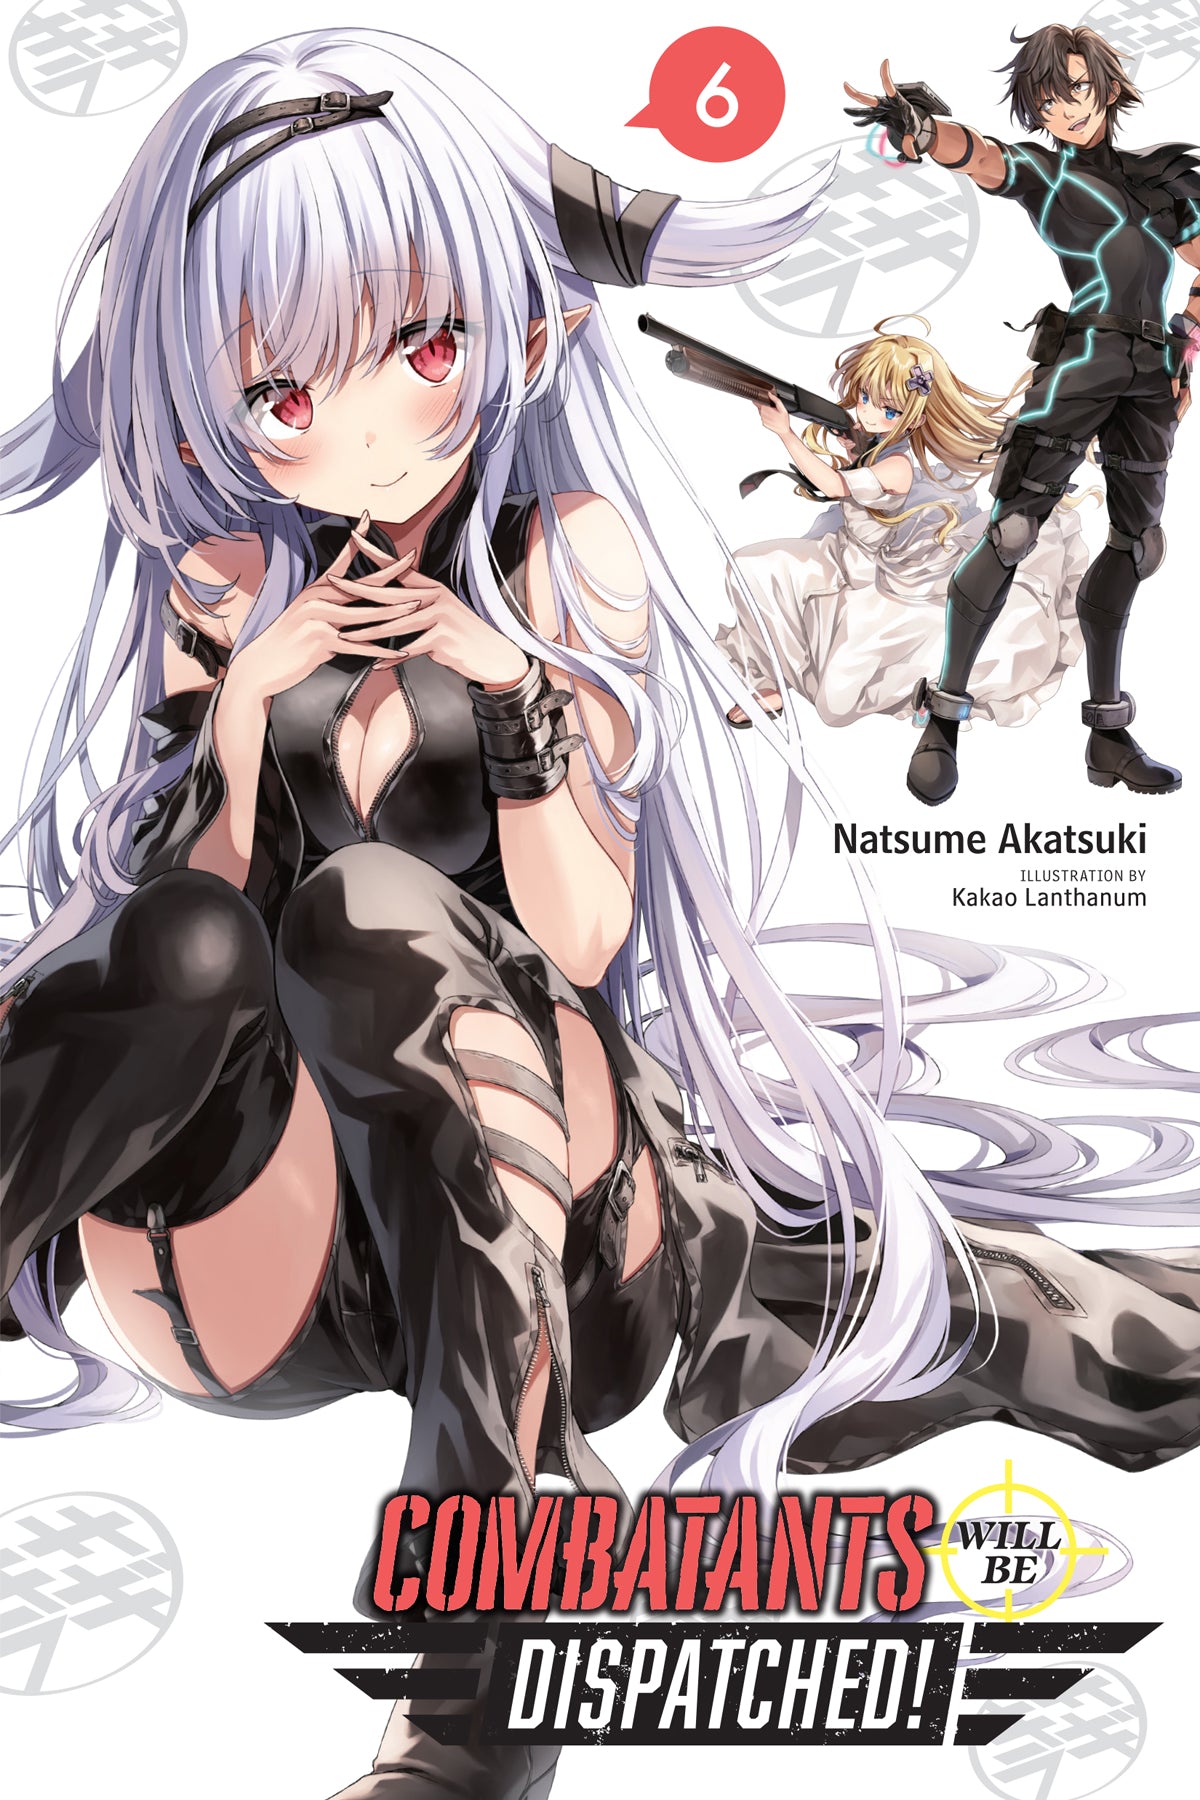 Combatants Will Be Dispatched! Vol. 06 (Light Novel)